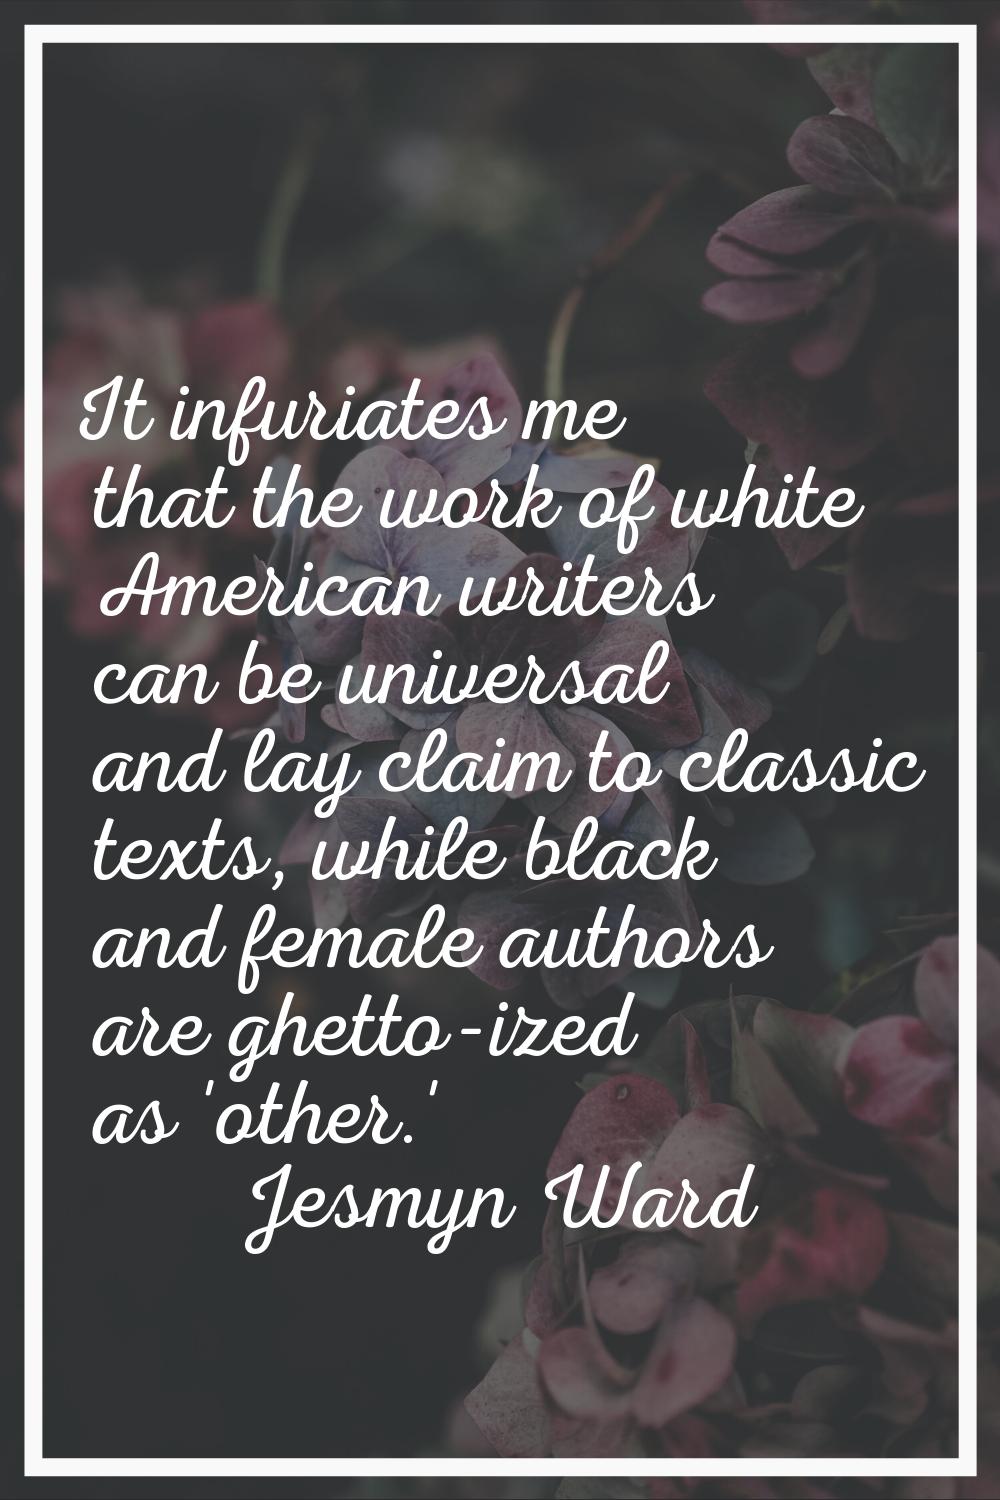 It infuriates me that the work of white American writers can be universal and lay claim to classic 